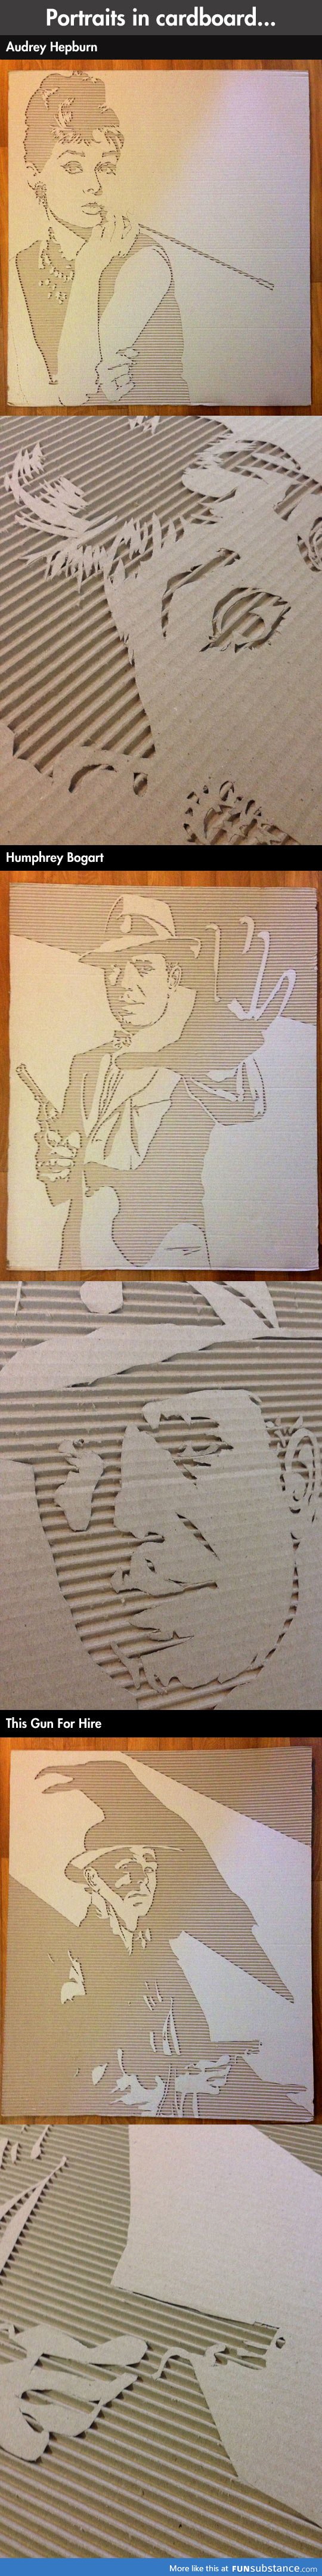 Carving portraits into cardboard